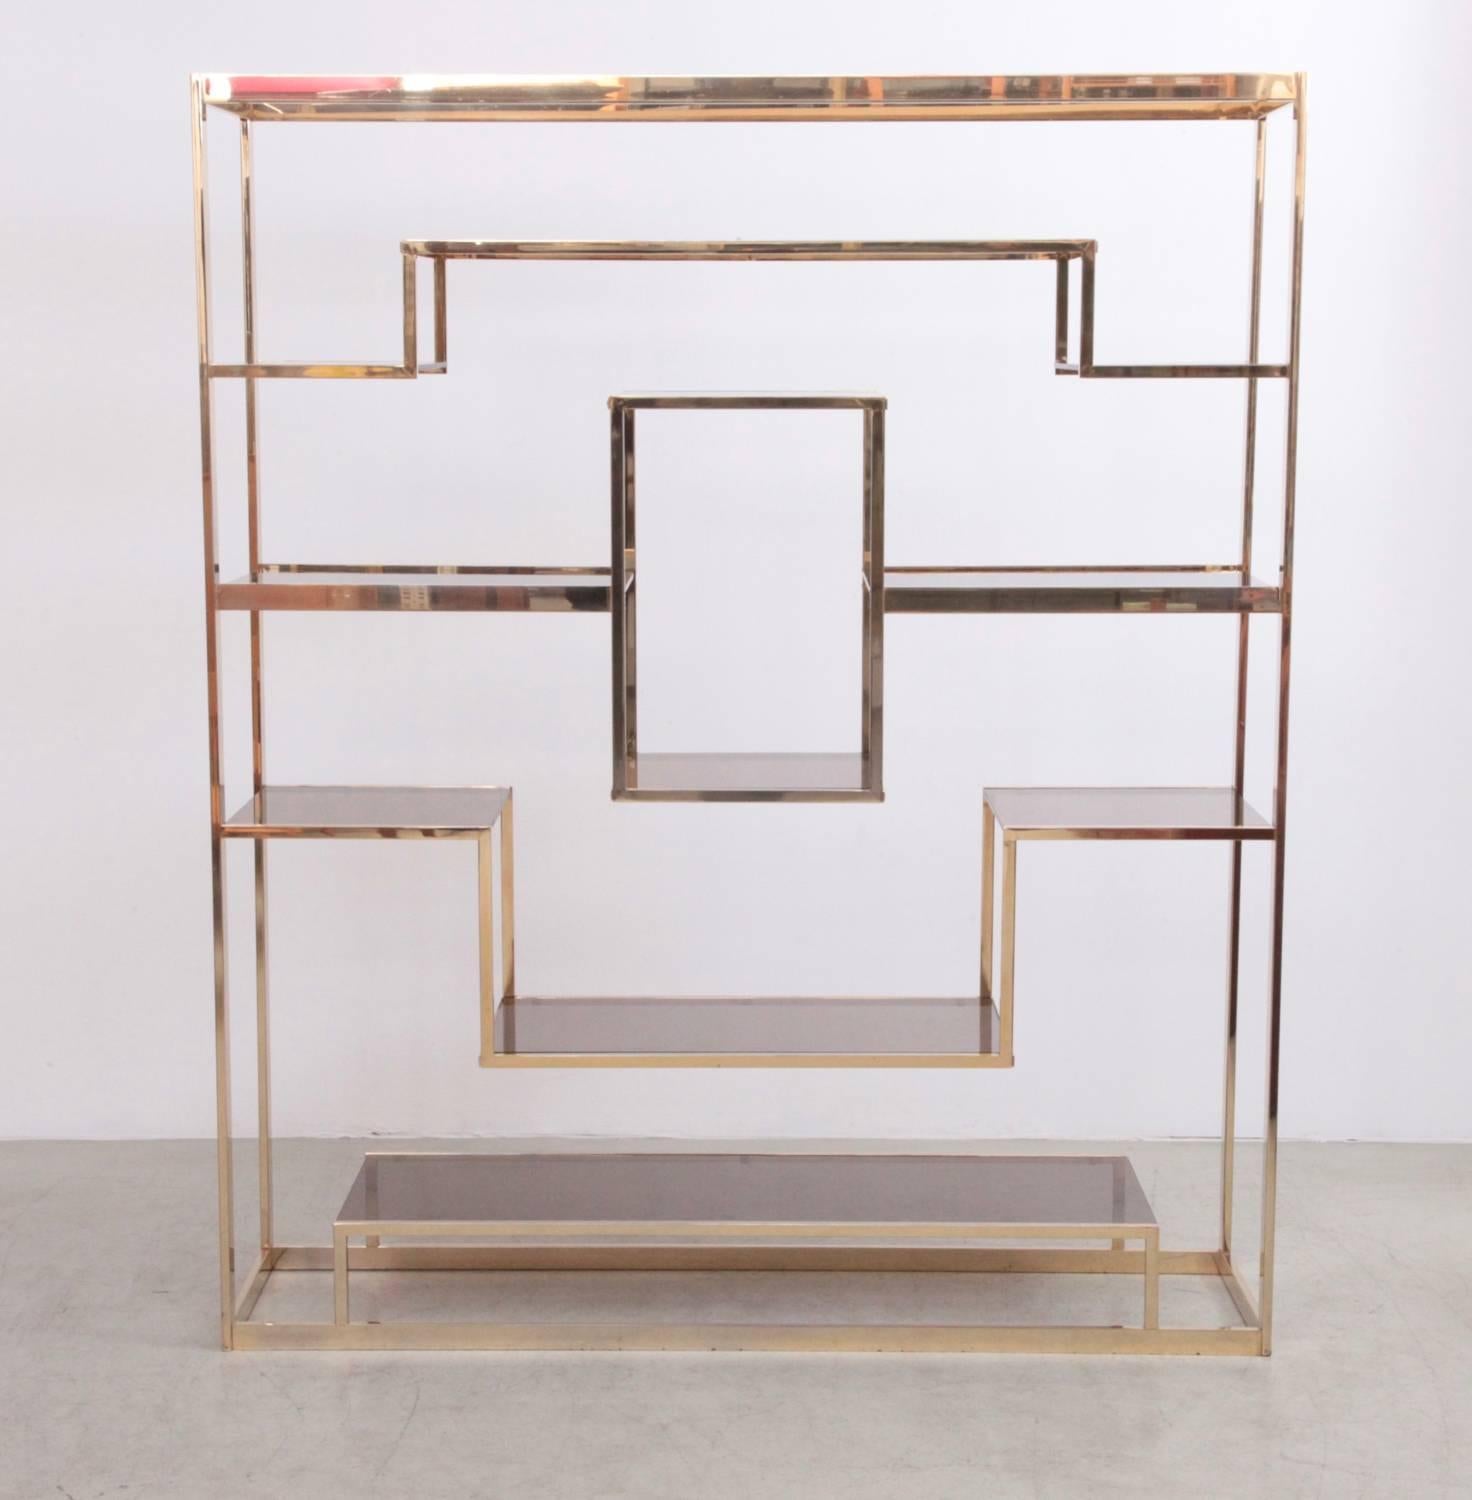 Large Romeo Rega shelf with brown glass and brass frame. Shelf and glass is in very good condition.